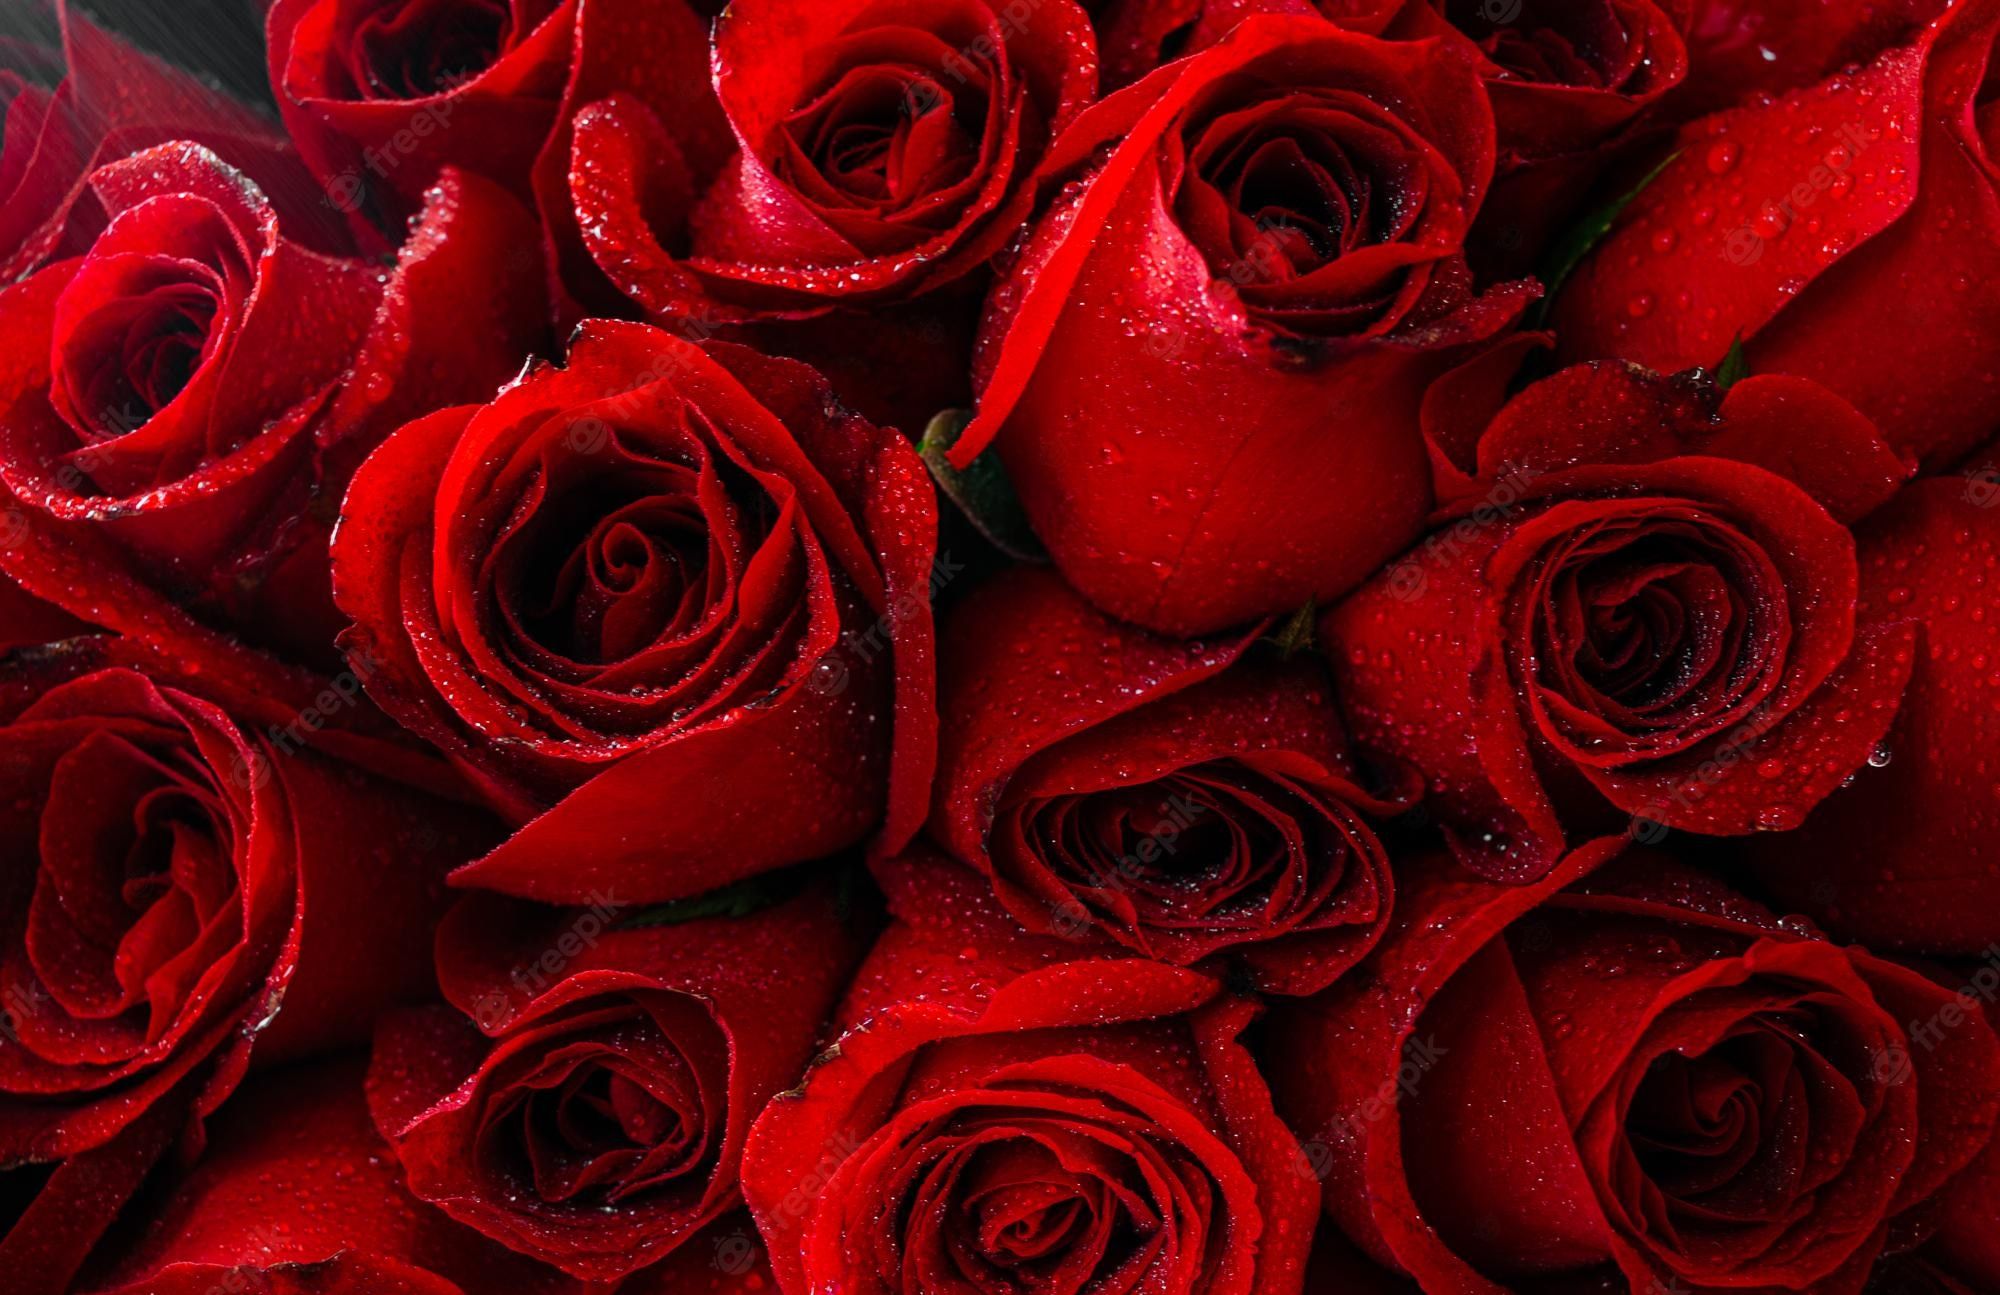 A bouquet of red roses with water droplets on them - Roses